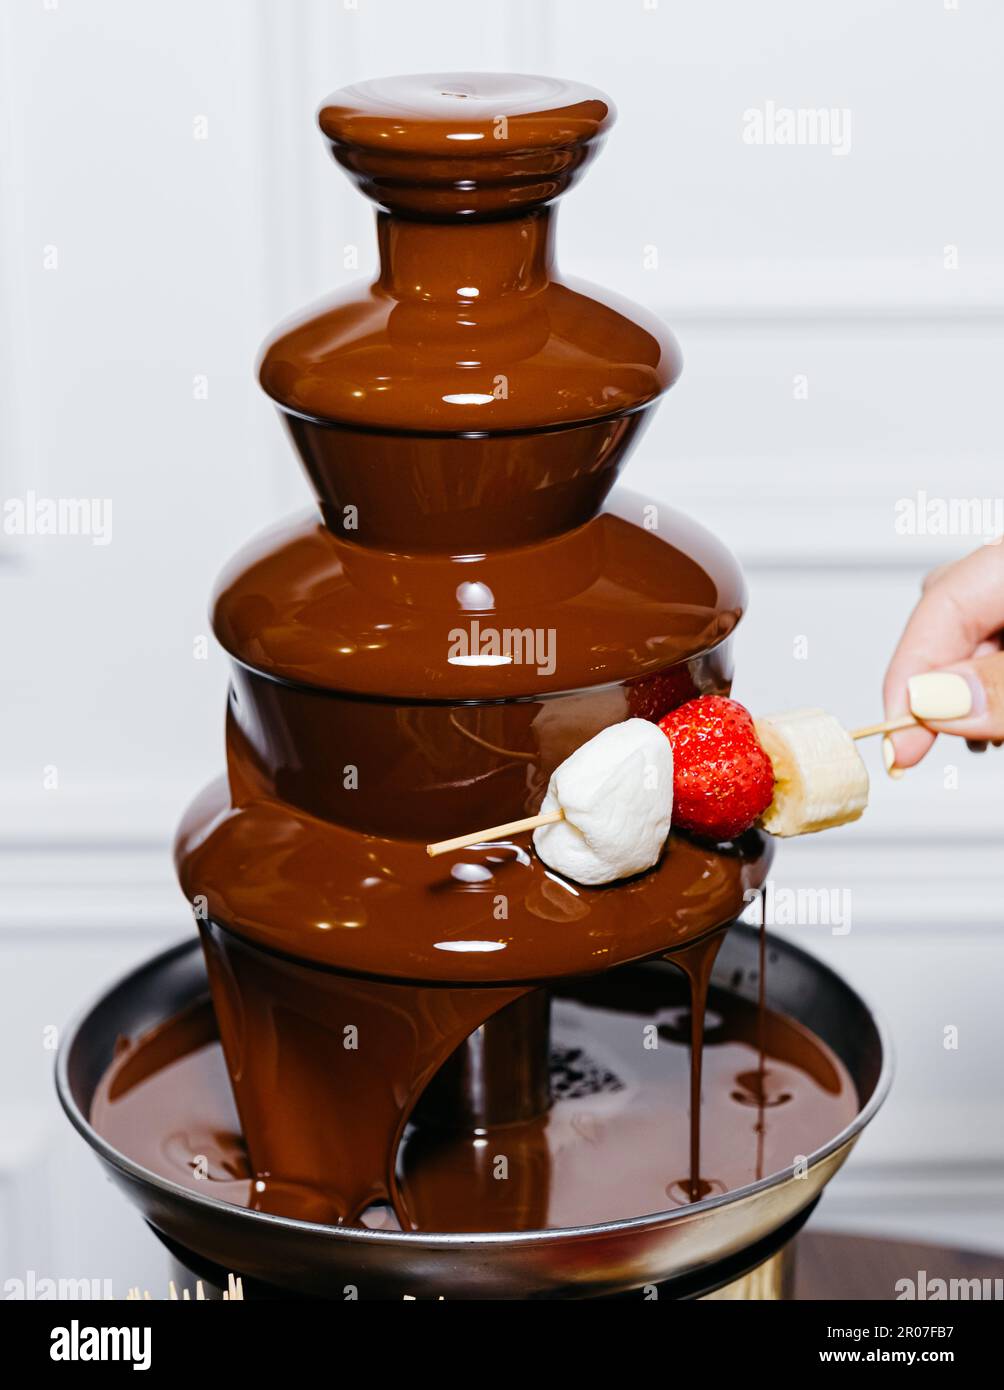 A person is enjoying a sweet dessert of banana, marshmallow, and strawberry pieces drizzled in chocolate from a chocolate fountain. Stock Photo